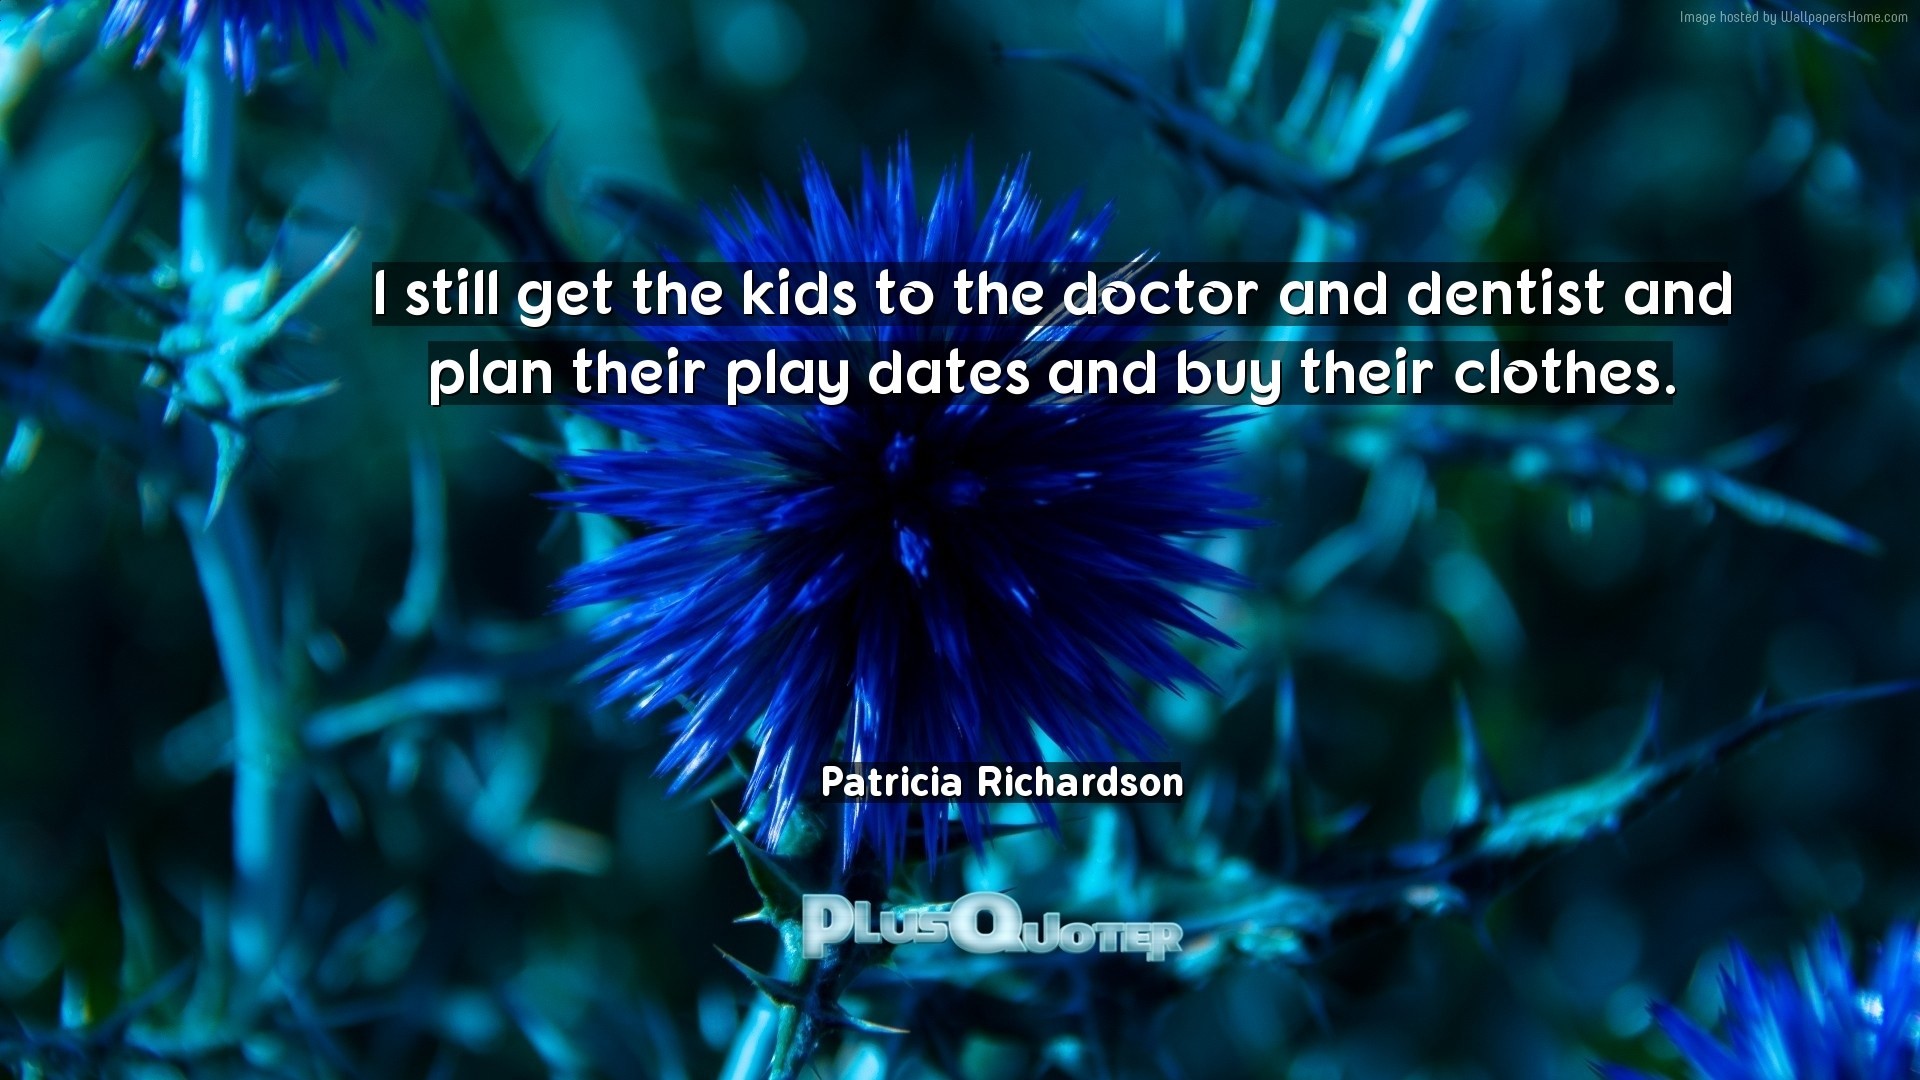 1920x1080 Download Wallpaper with inspirational Quotes- "I still get the kids to the  doctor and